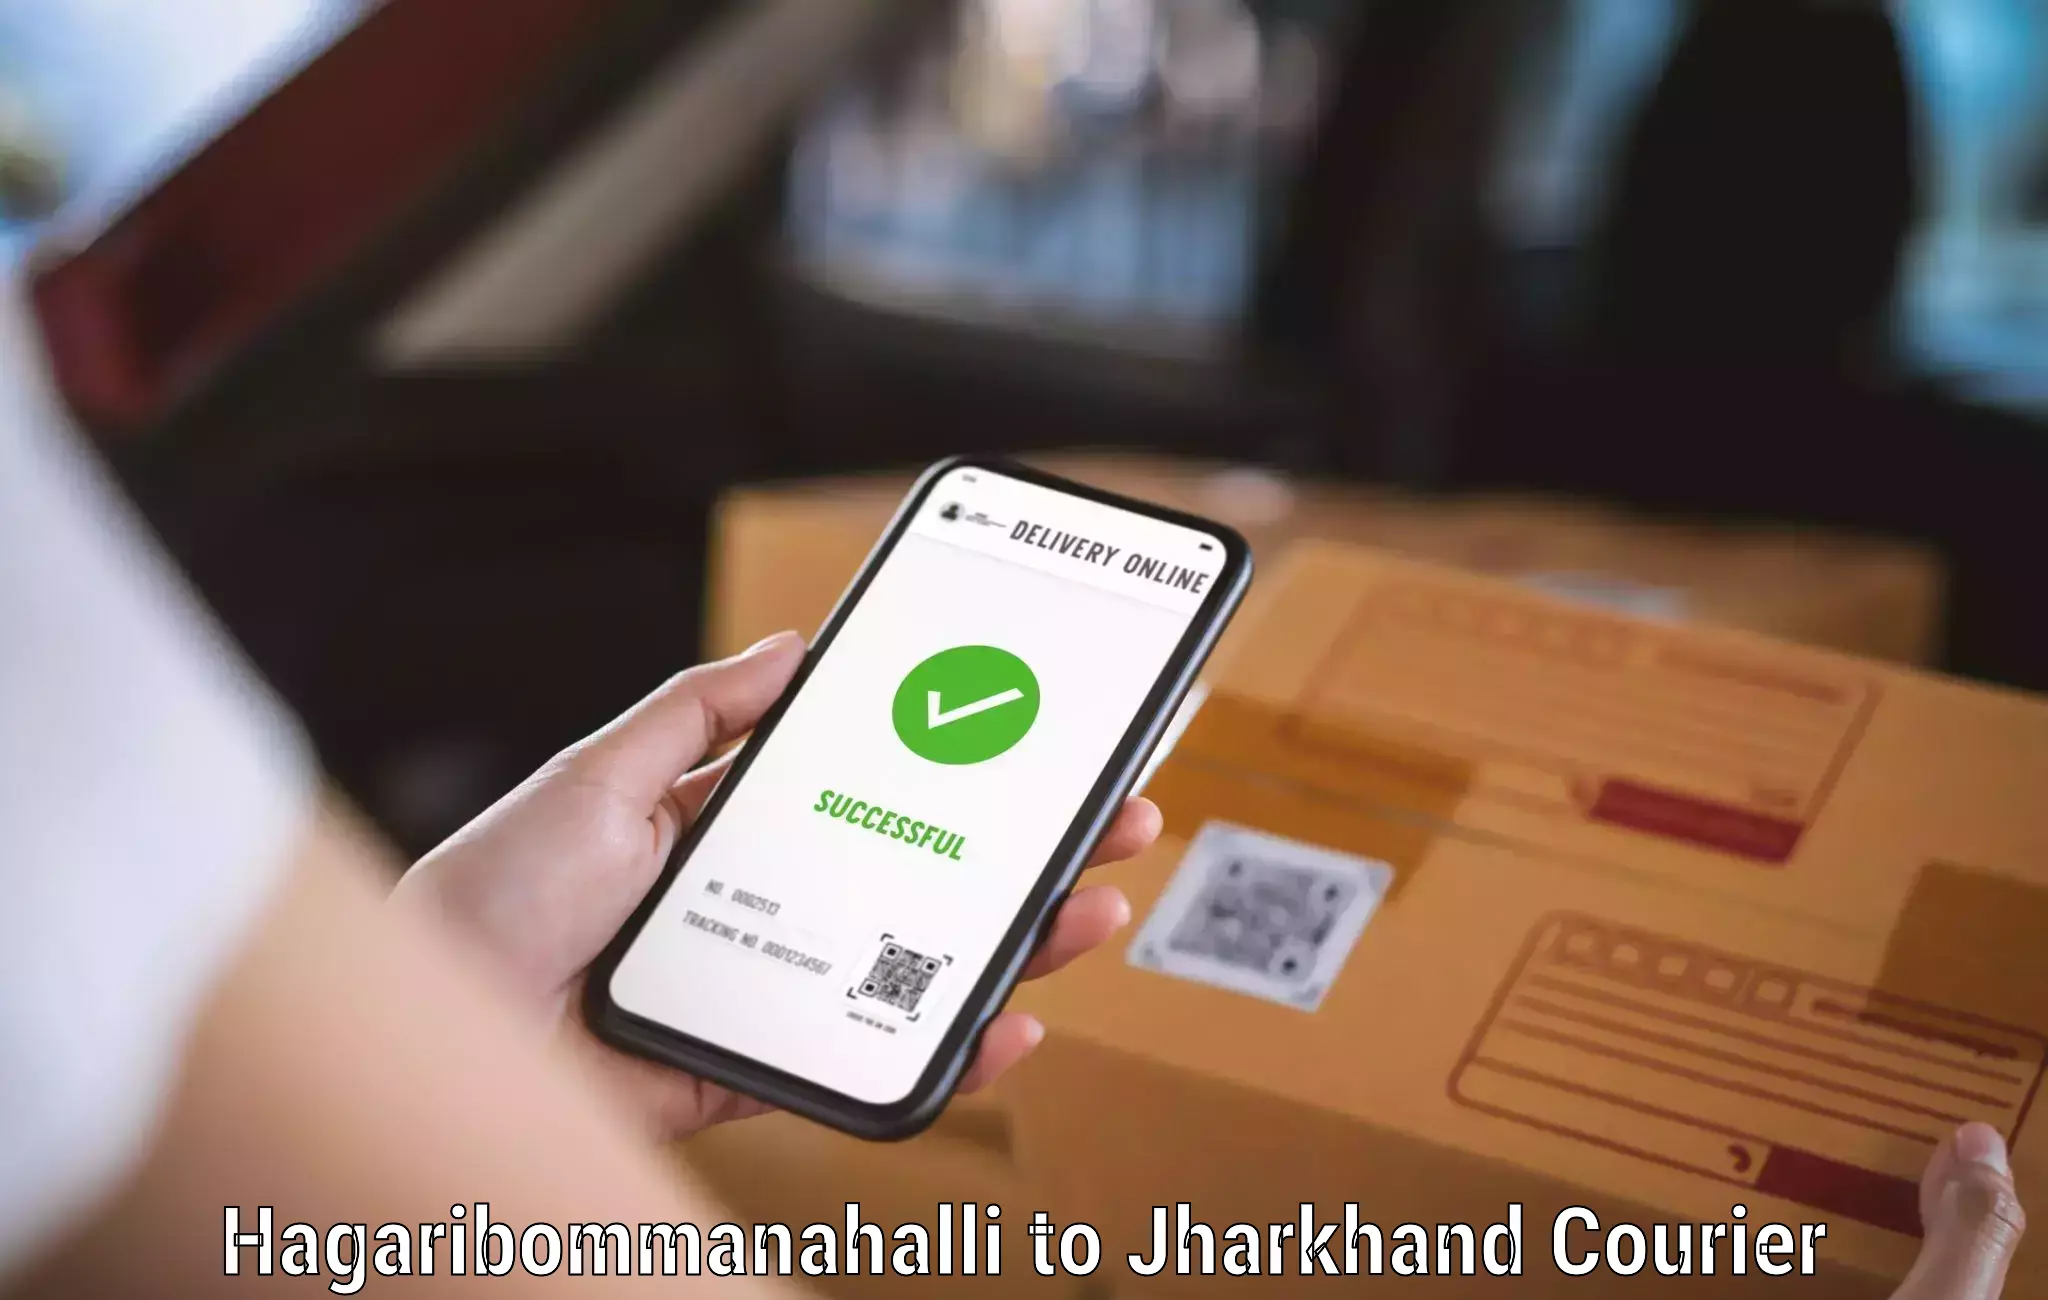 Local delivery service Hagaribommanahalli to Poreyahat